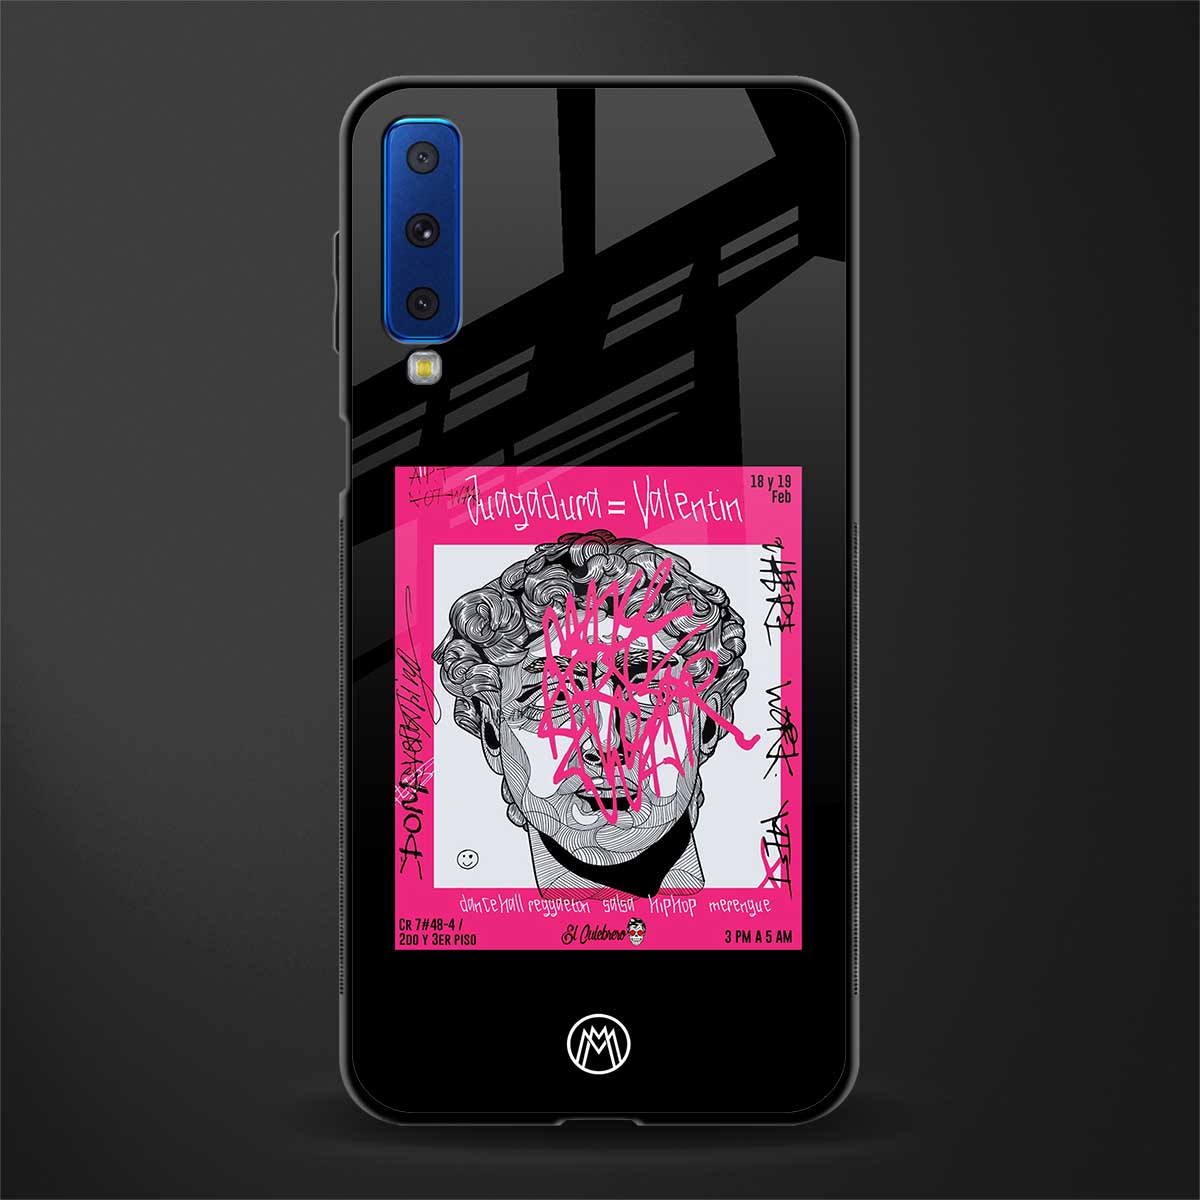 scribbled david michelangelo glass case for samsung galaxy a7 2018 image